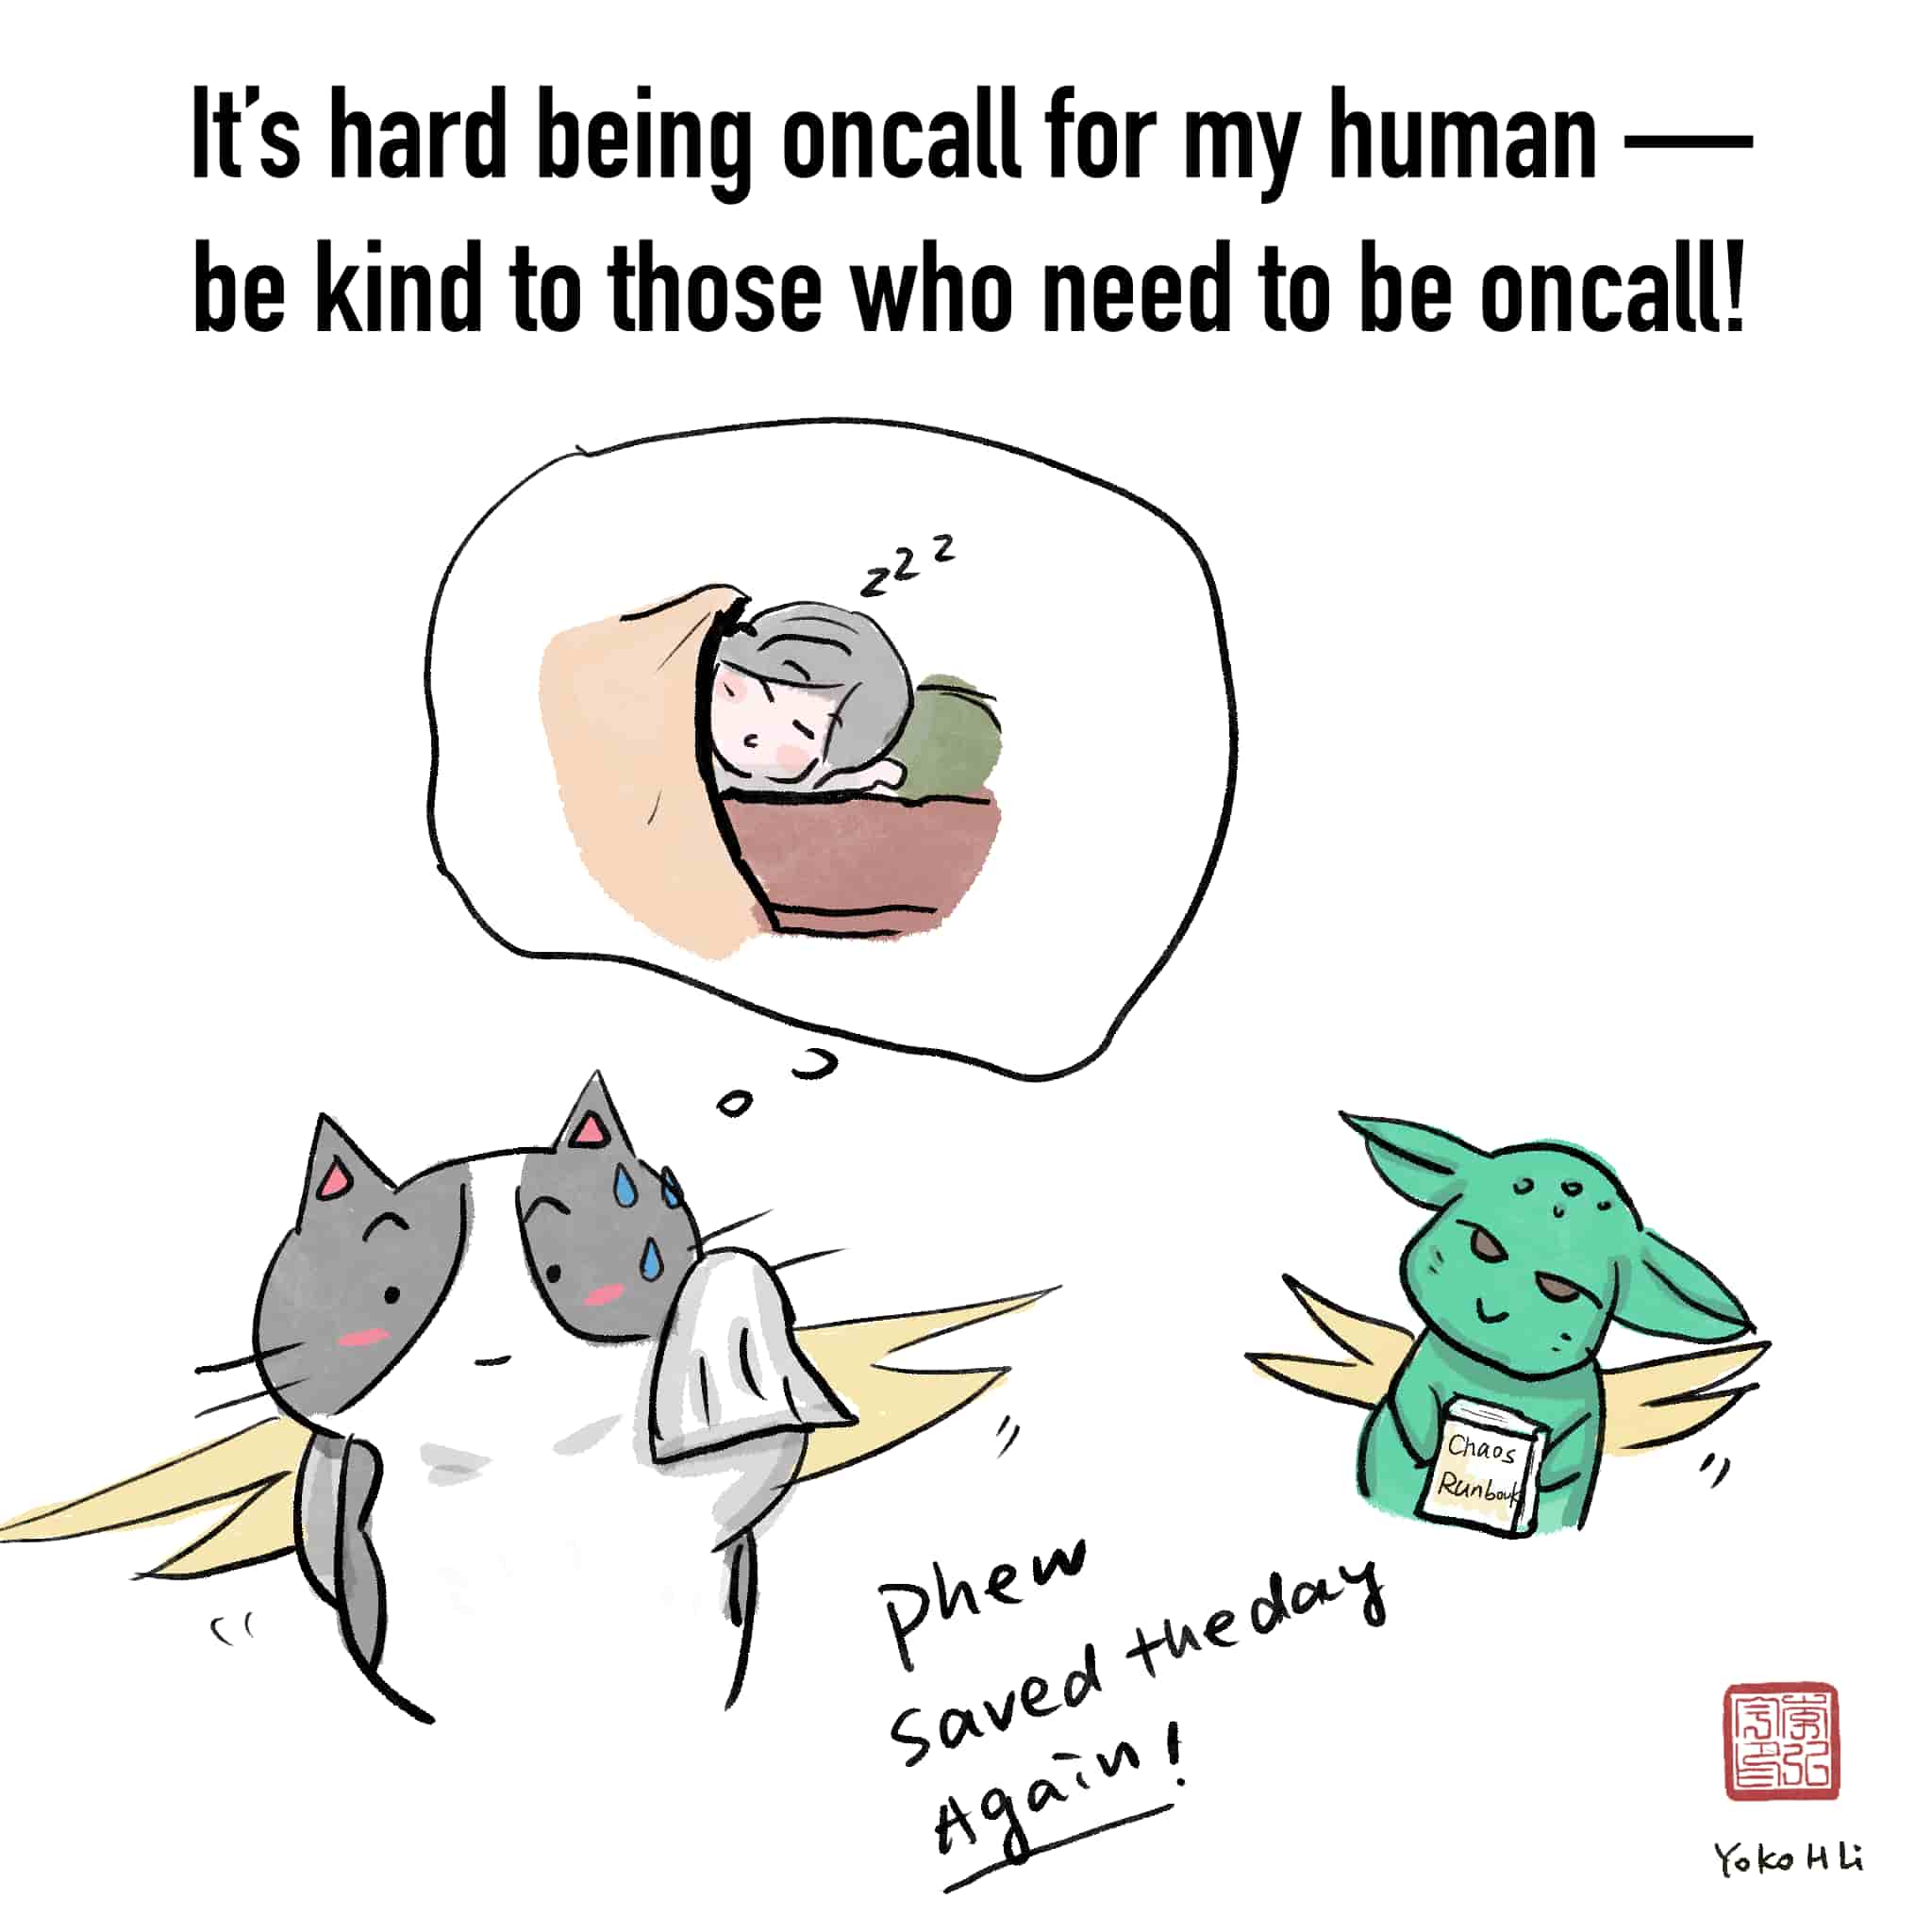 Comic: It's hard being oncall for my human -- be kind to those who need to be oncall! Image: Cat and Gremlin saved the day, again!